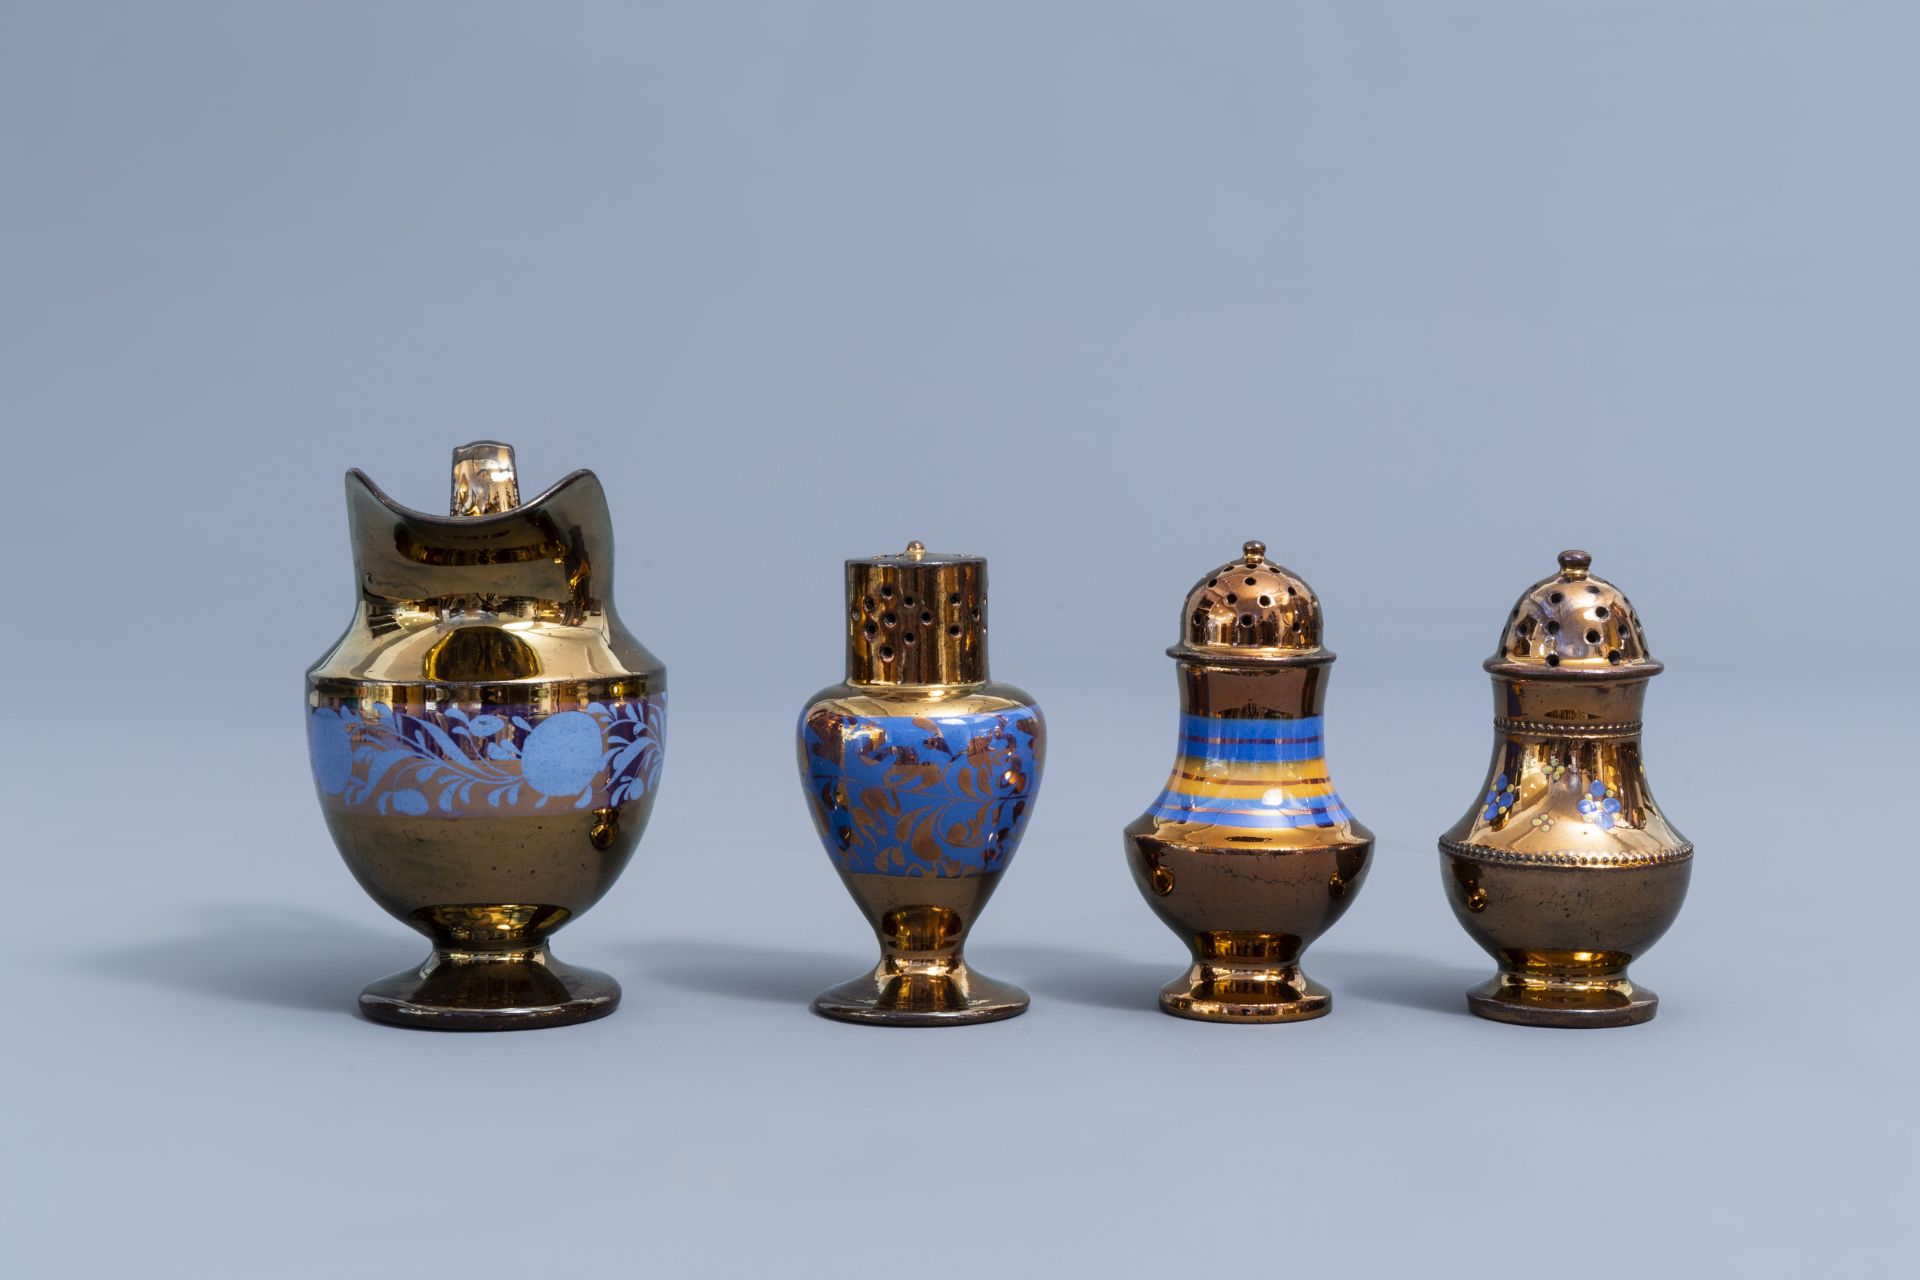 A varied collection of English lustreware items with blue design, 19th C. - Image 10 of 50